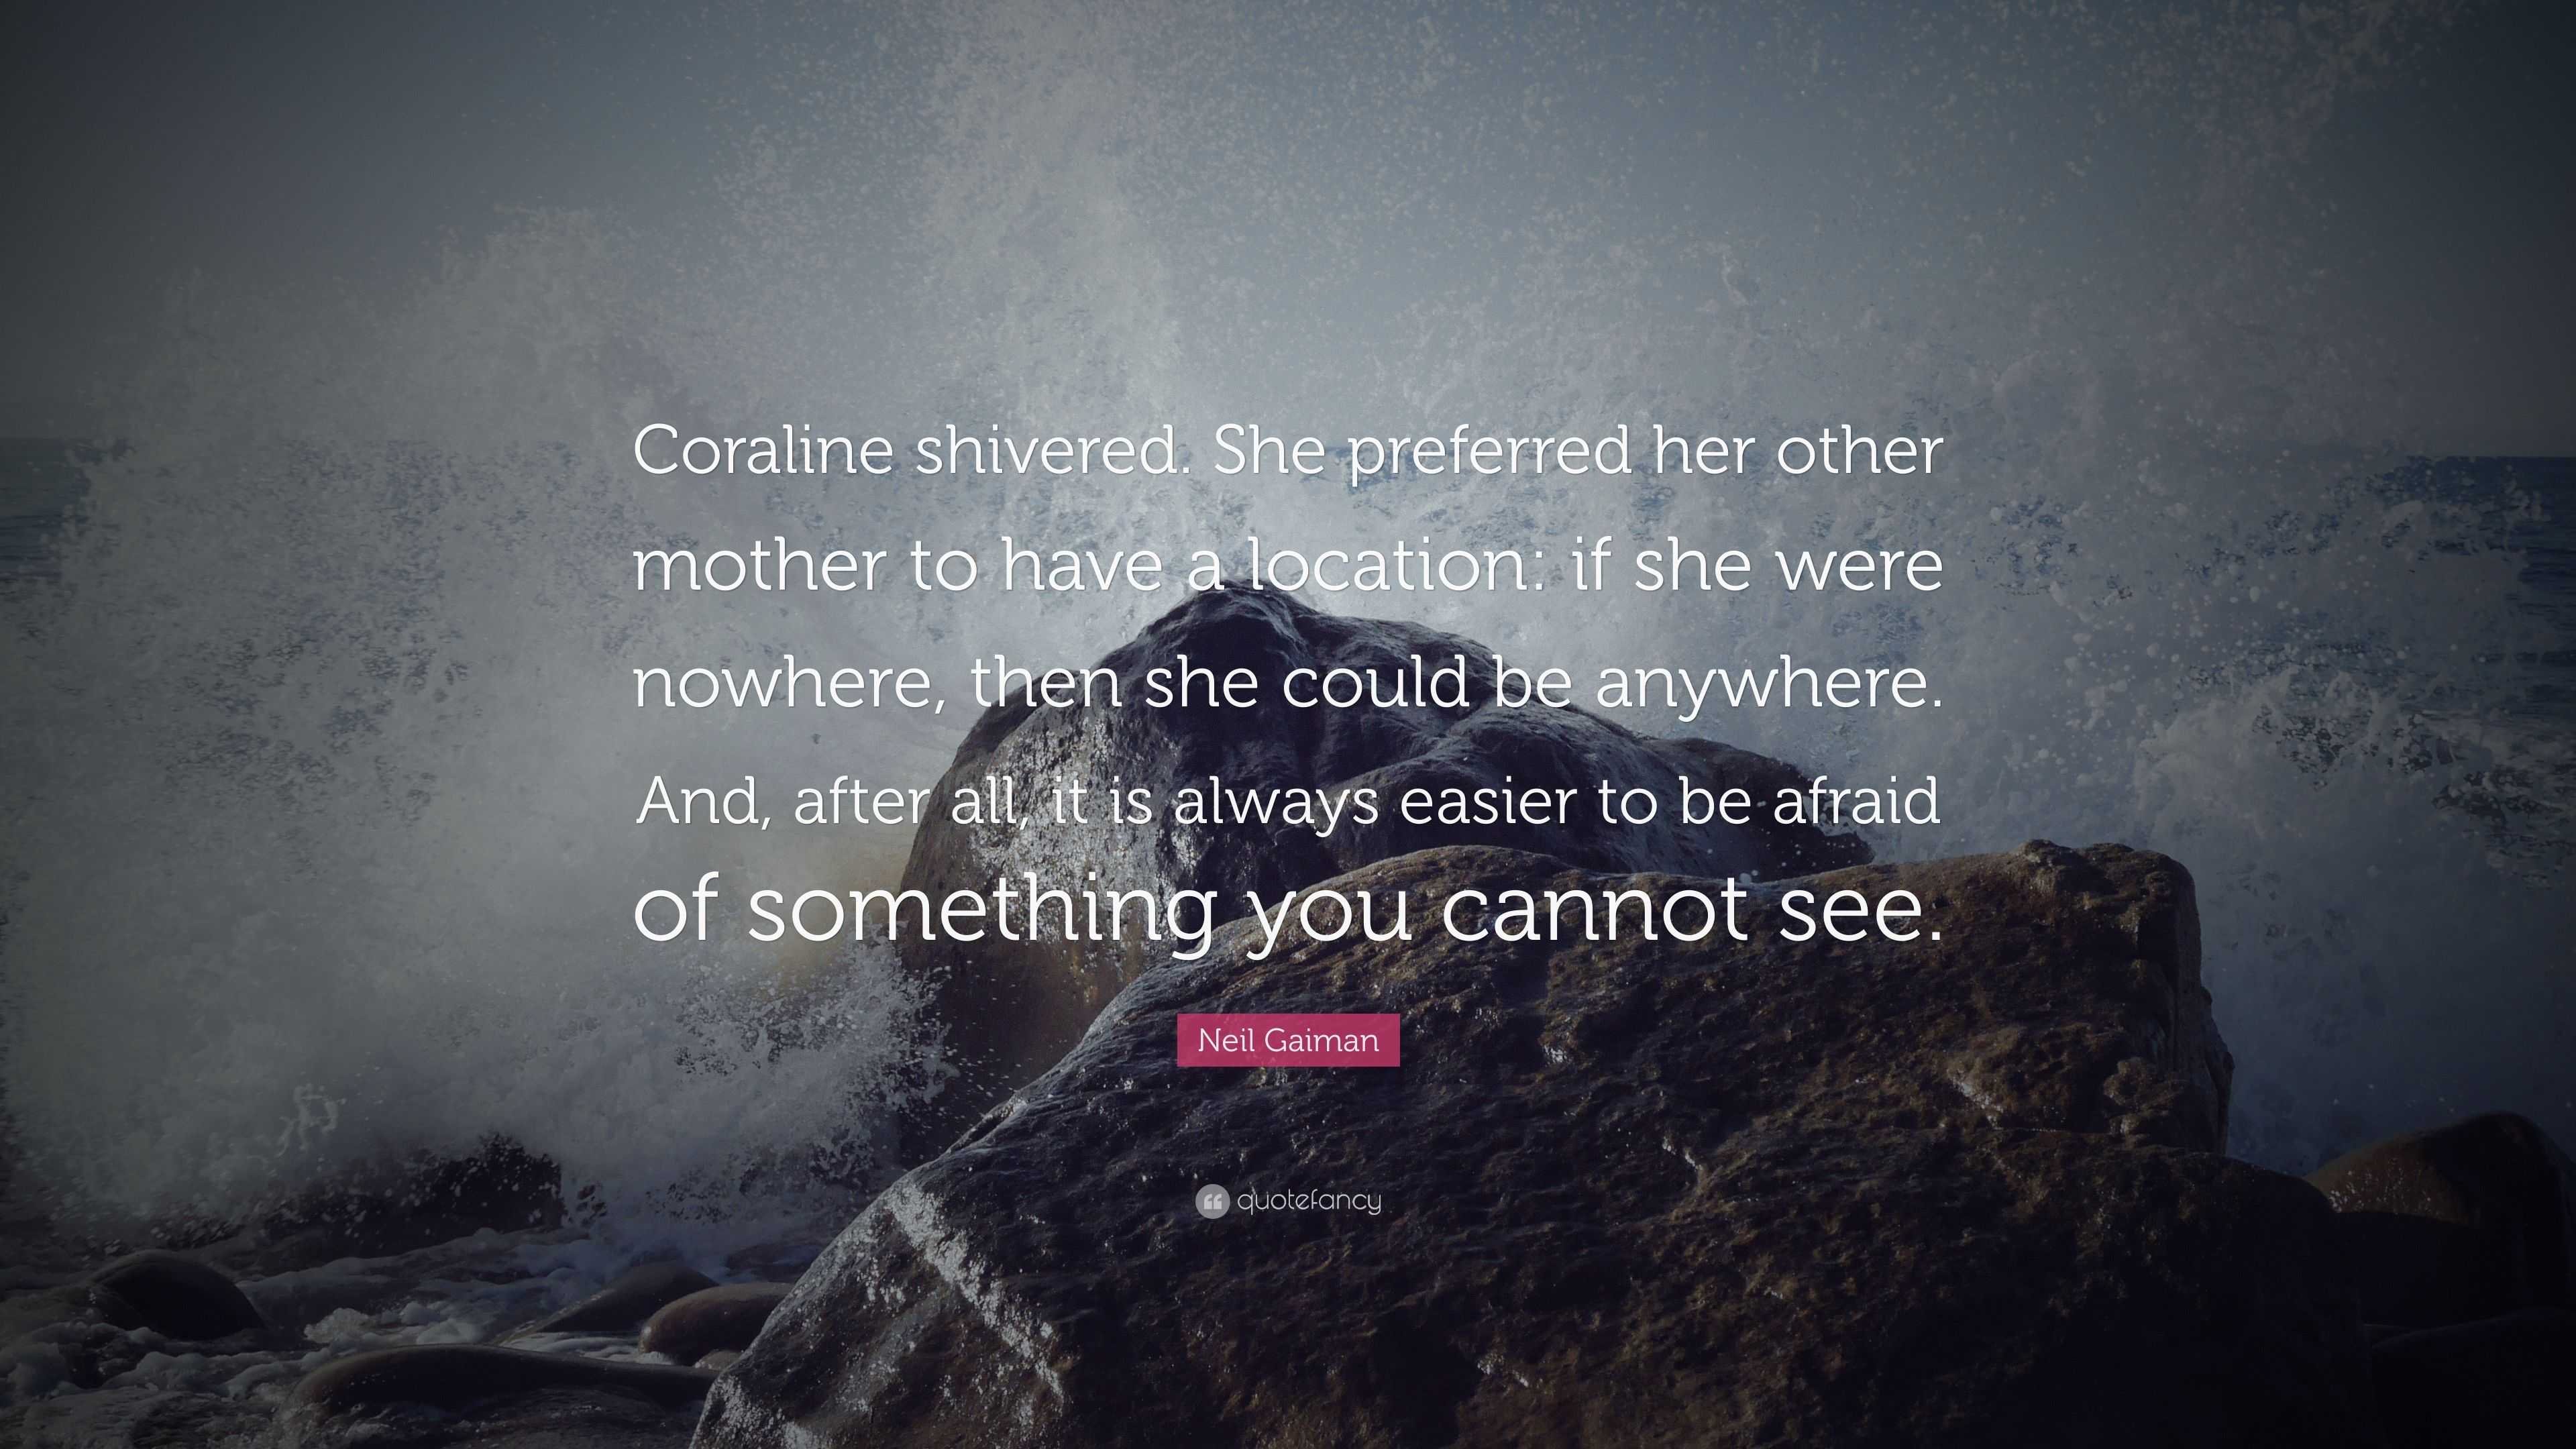 Neil Gaiman Quote: “Coraline shivered. She preferred her other mother ...